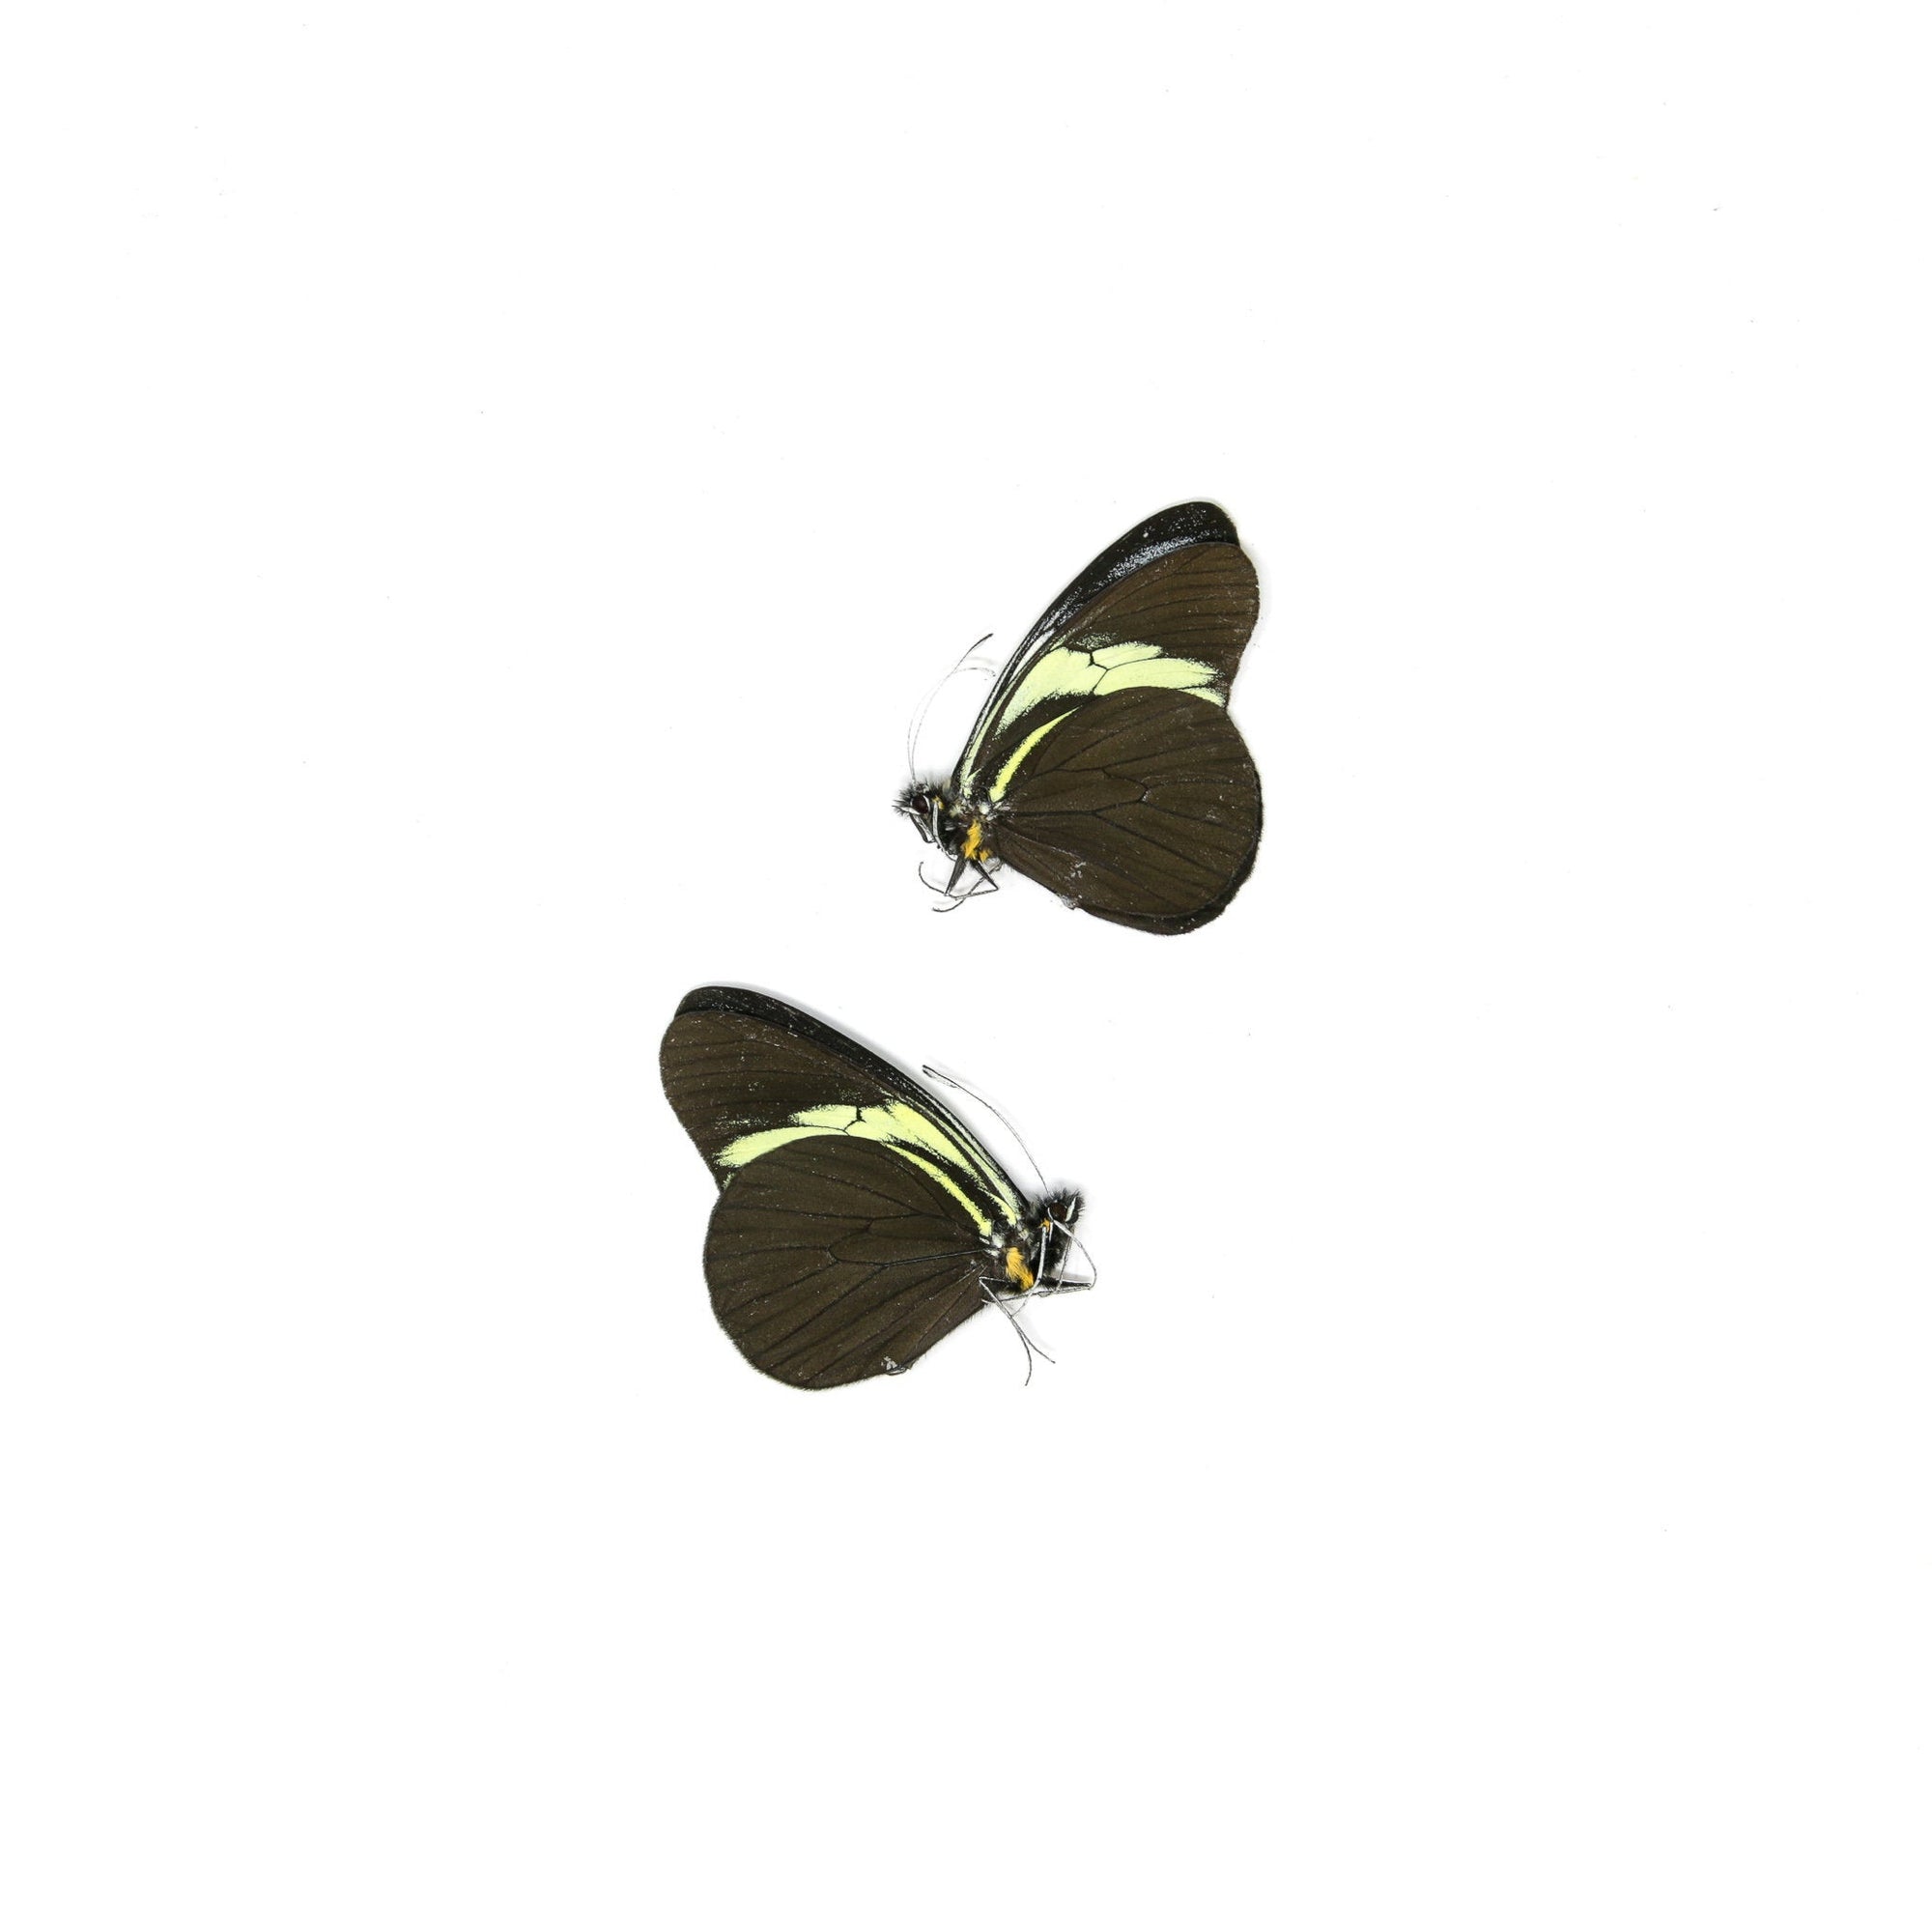 2 x The Sara Longwing | Heliconius sara | Dry-Preserved Unmounted Butterfly Specimens A1